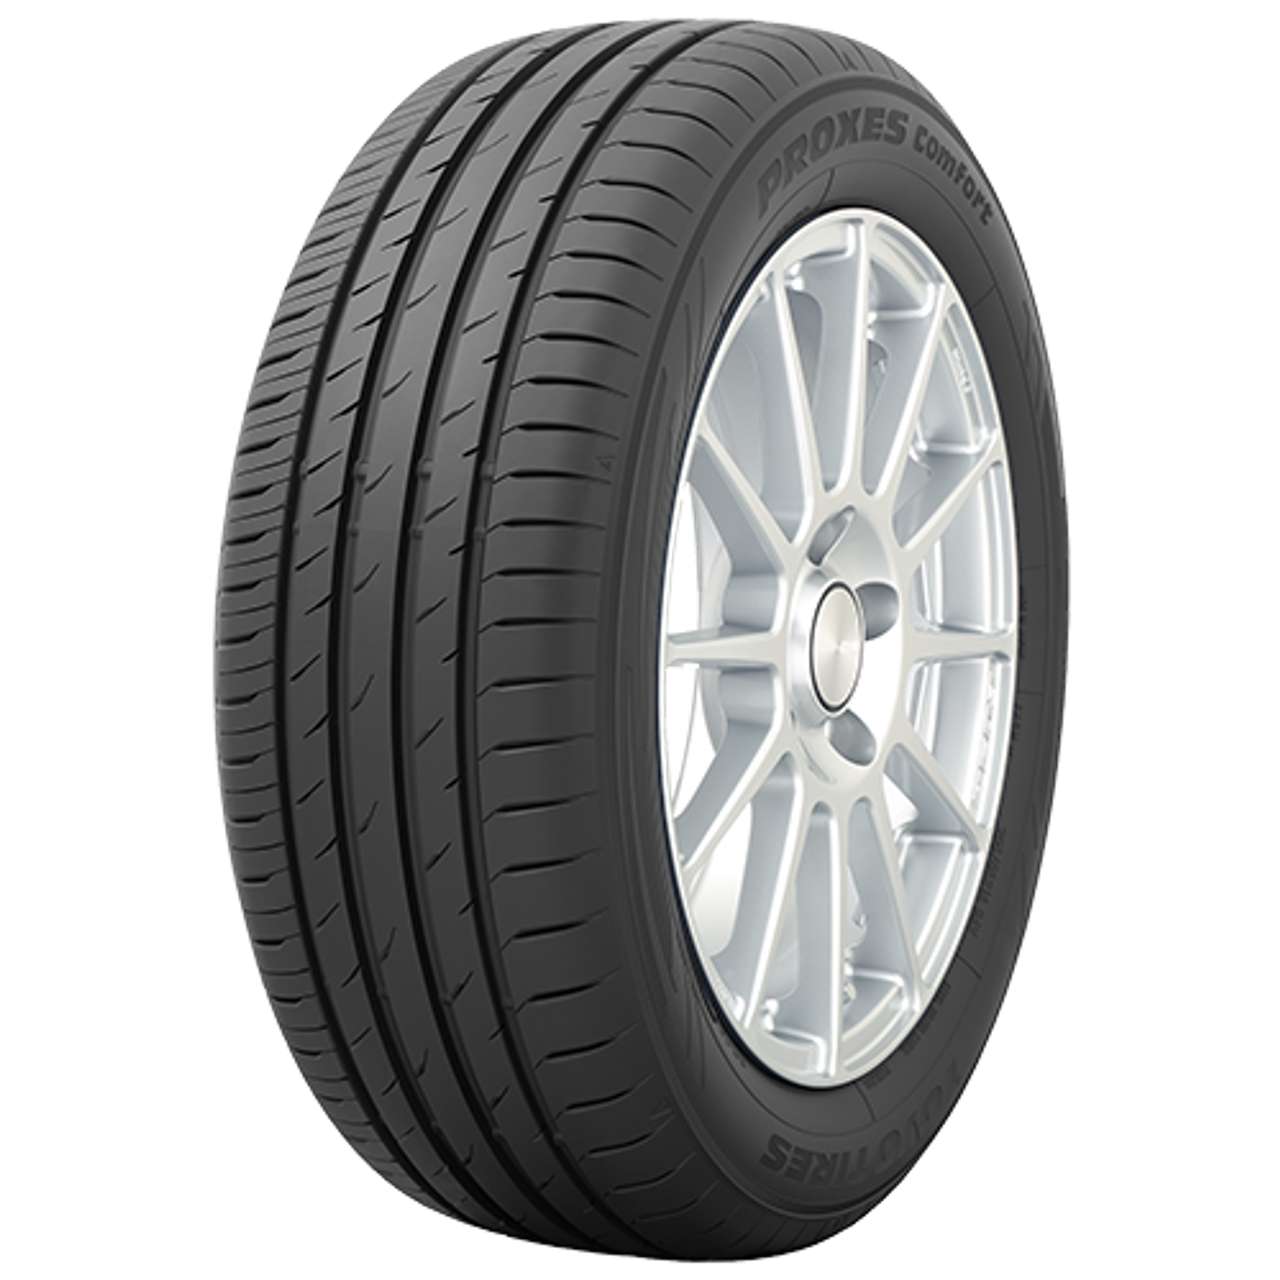 TOYO PROXES COMFORT 215/40R17 87V MFS BSW